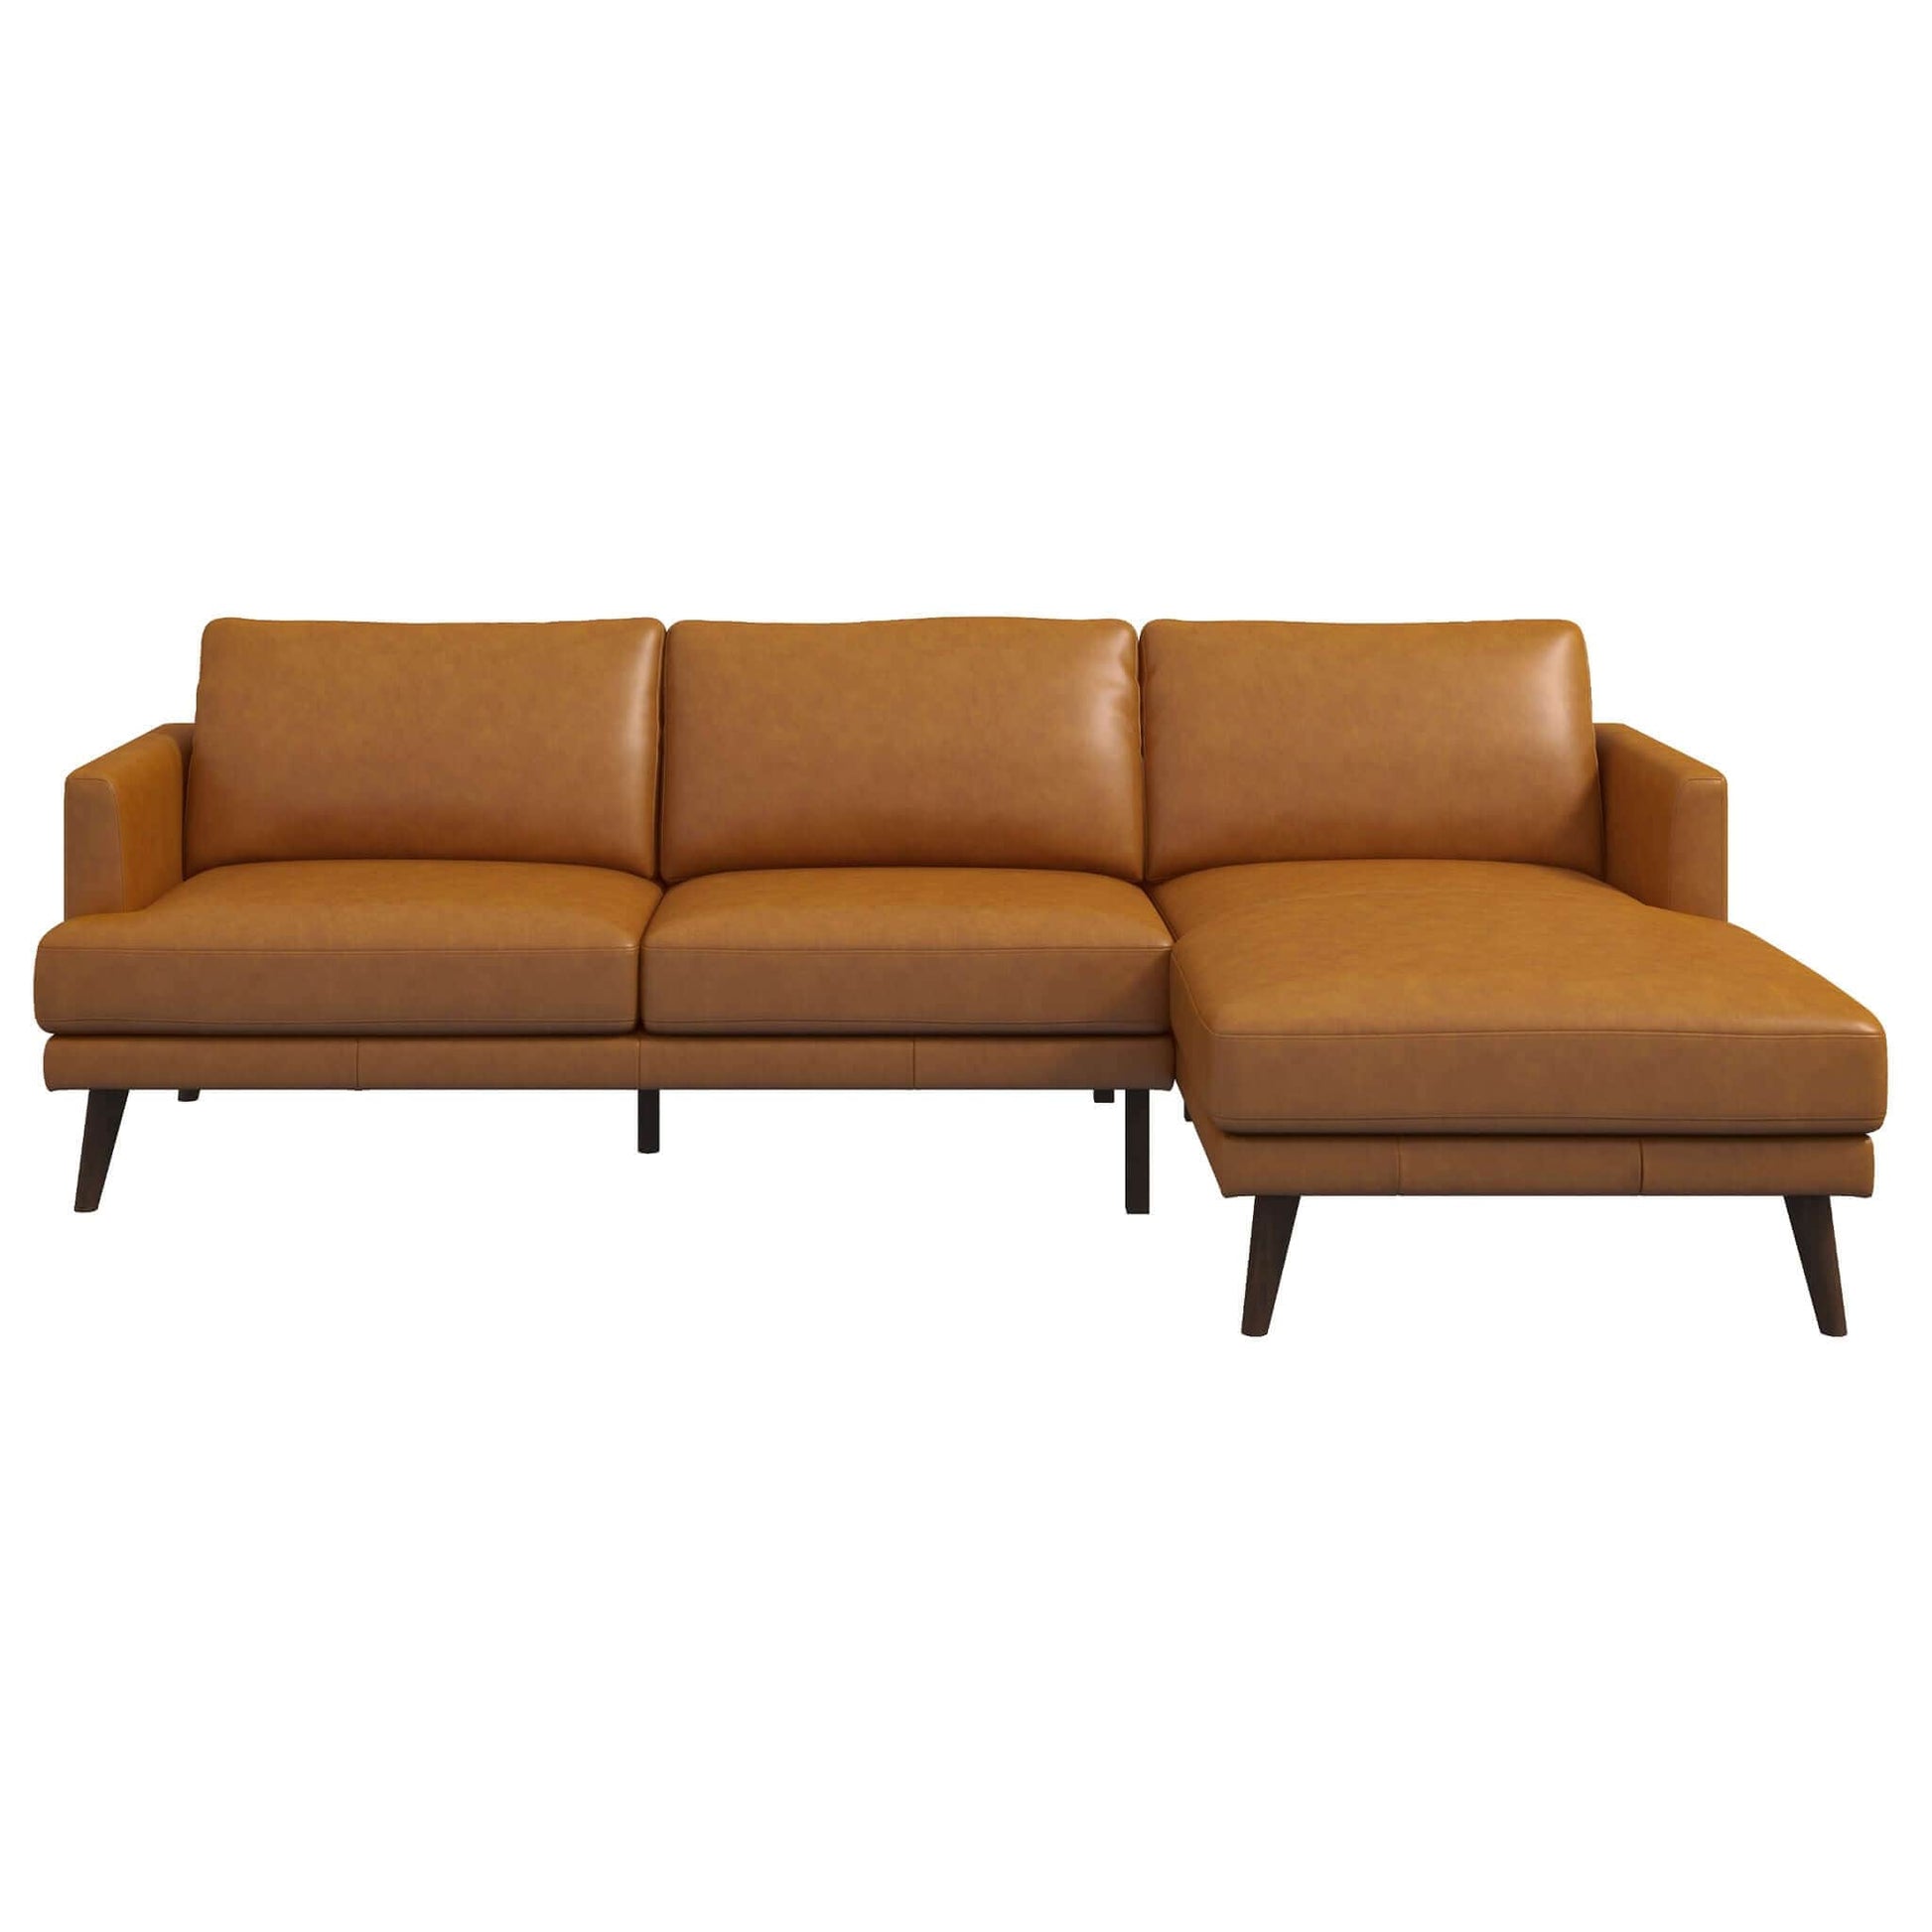 Ashcroft Furniture Co Right sectional Lore Mid-Century Modern L-Shaped Genuine Leather Sectional in Tan